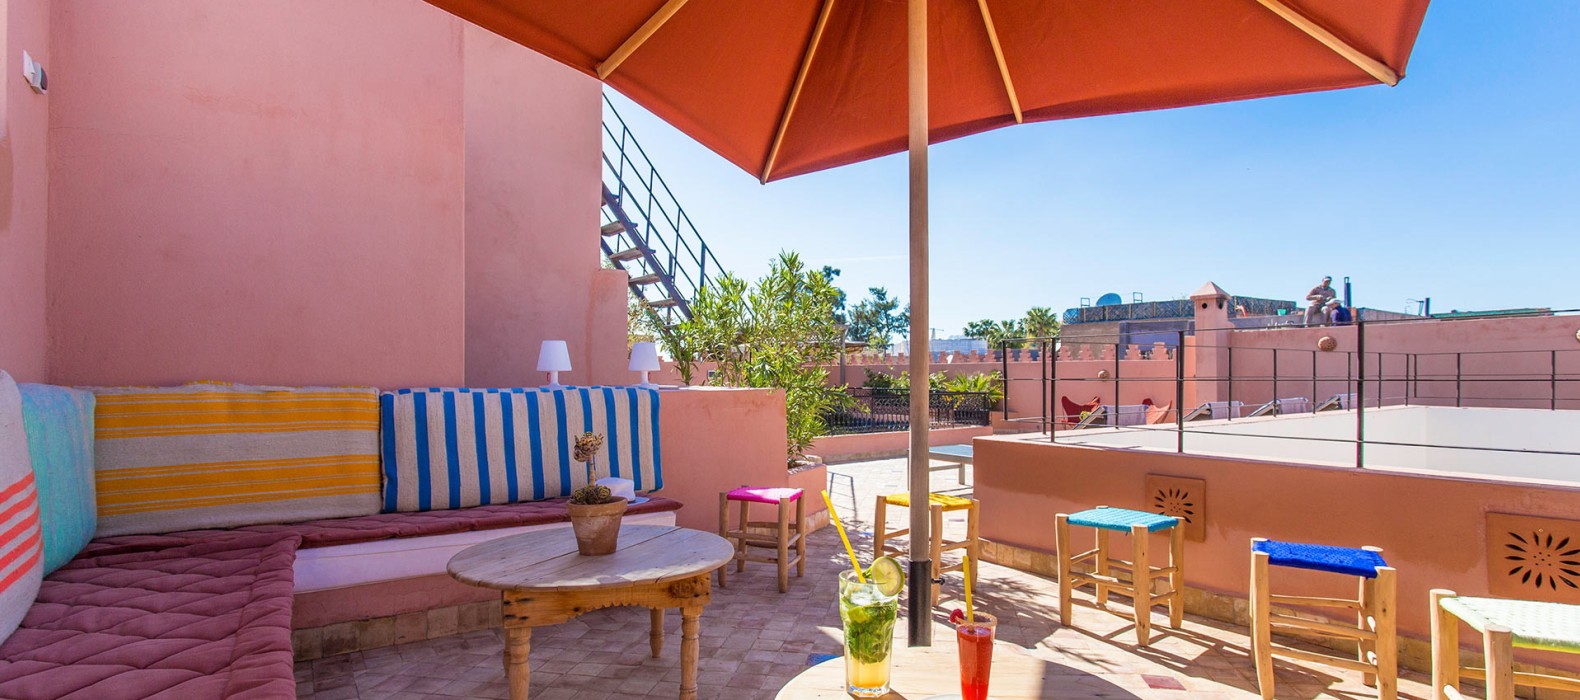 Rooftop view of Riad Mima in Marrakech